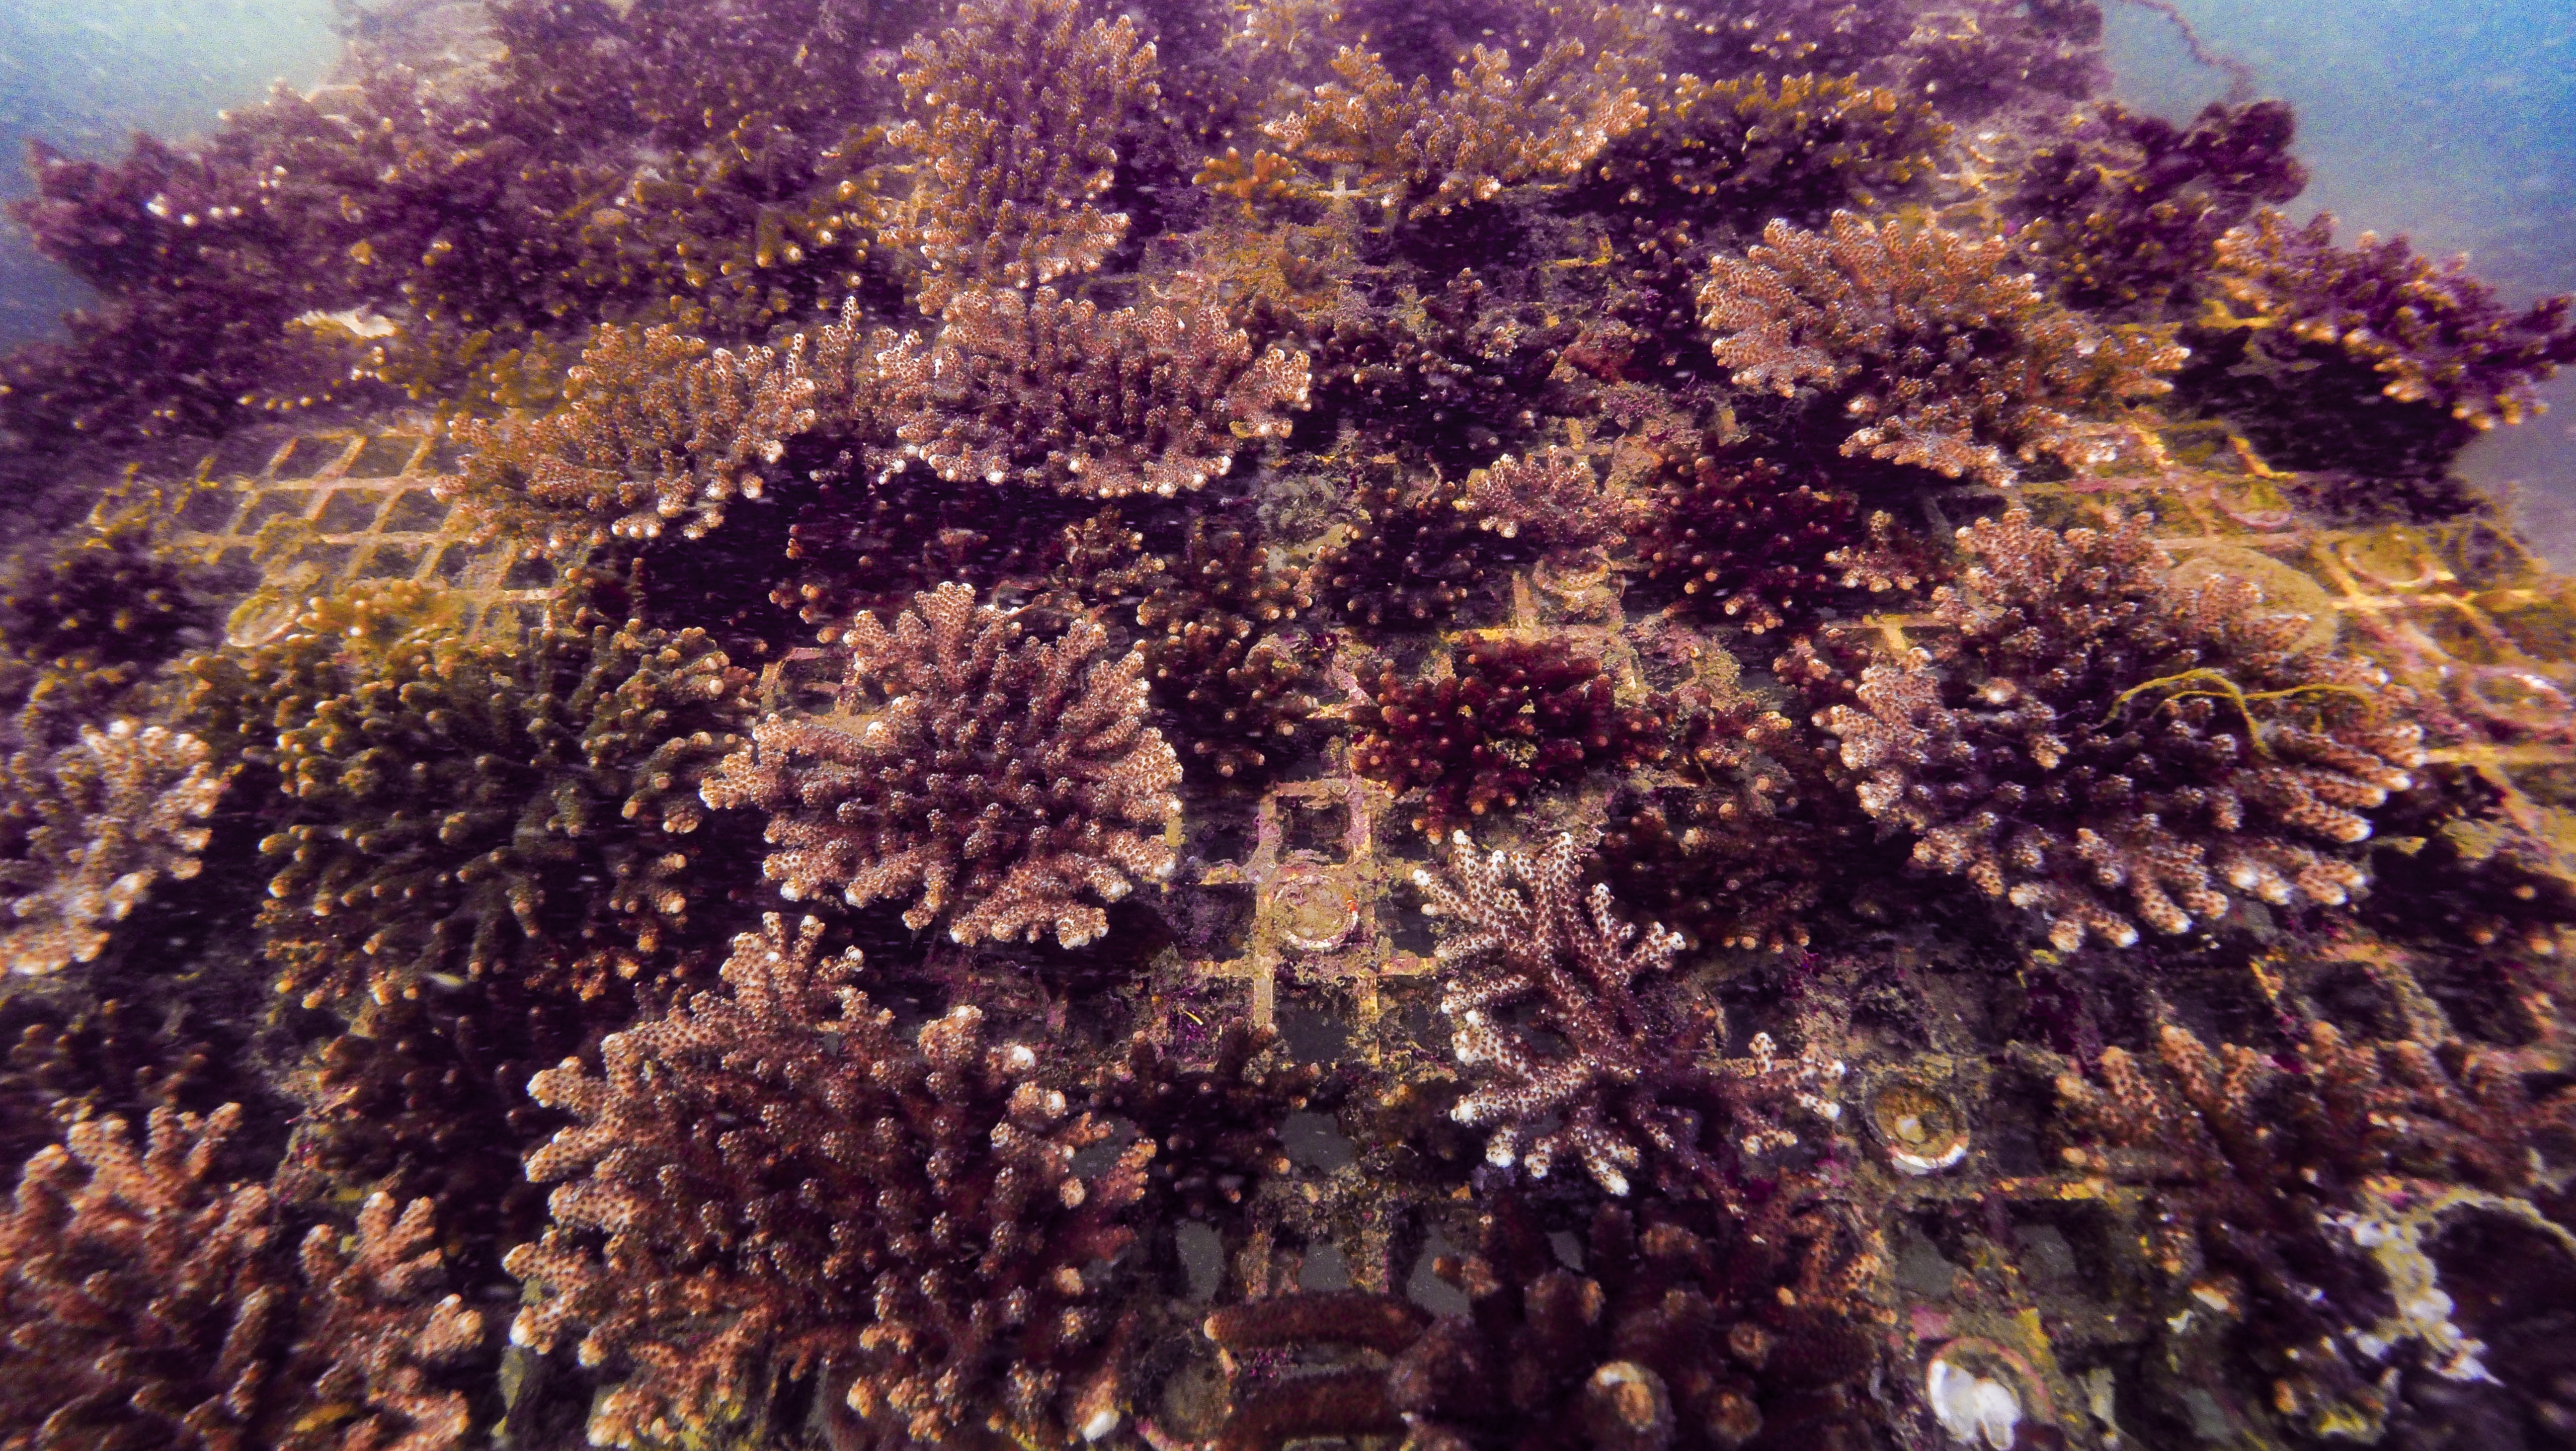 Corals planted in the ocean.